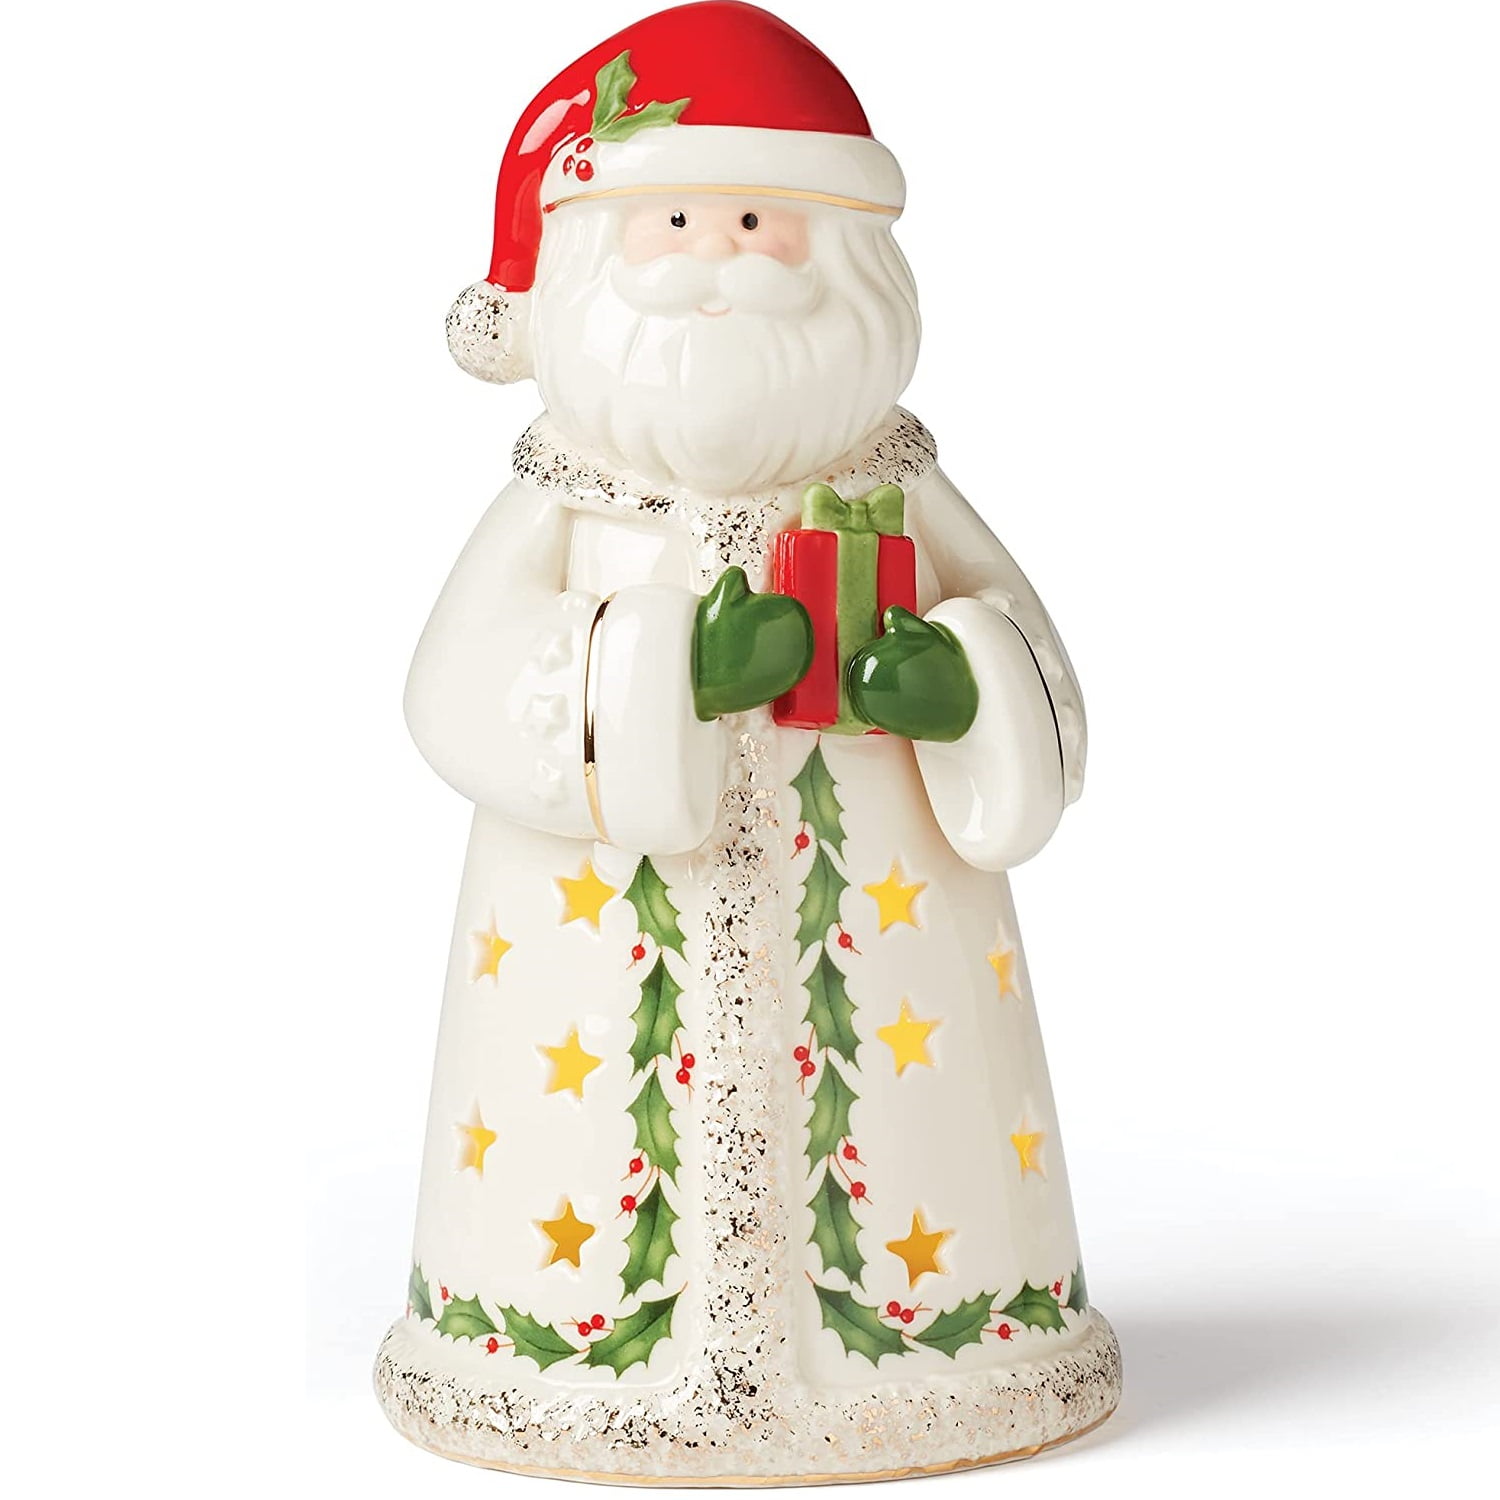 New in Box Lenox -Light-Up Christmas Gnome House Figurine